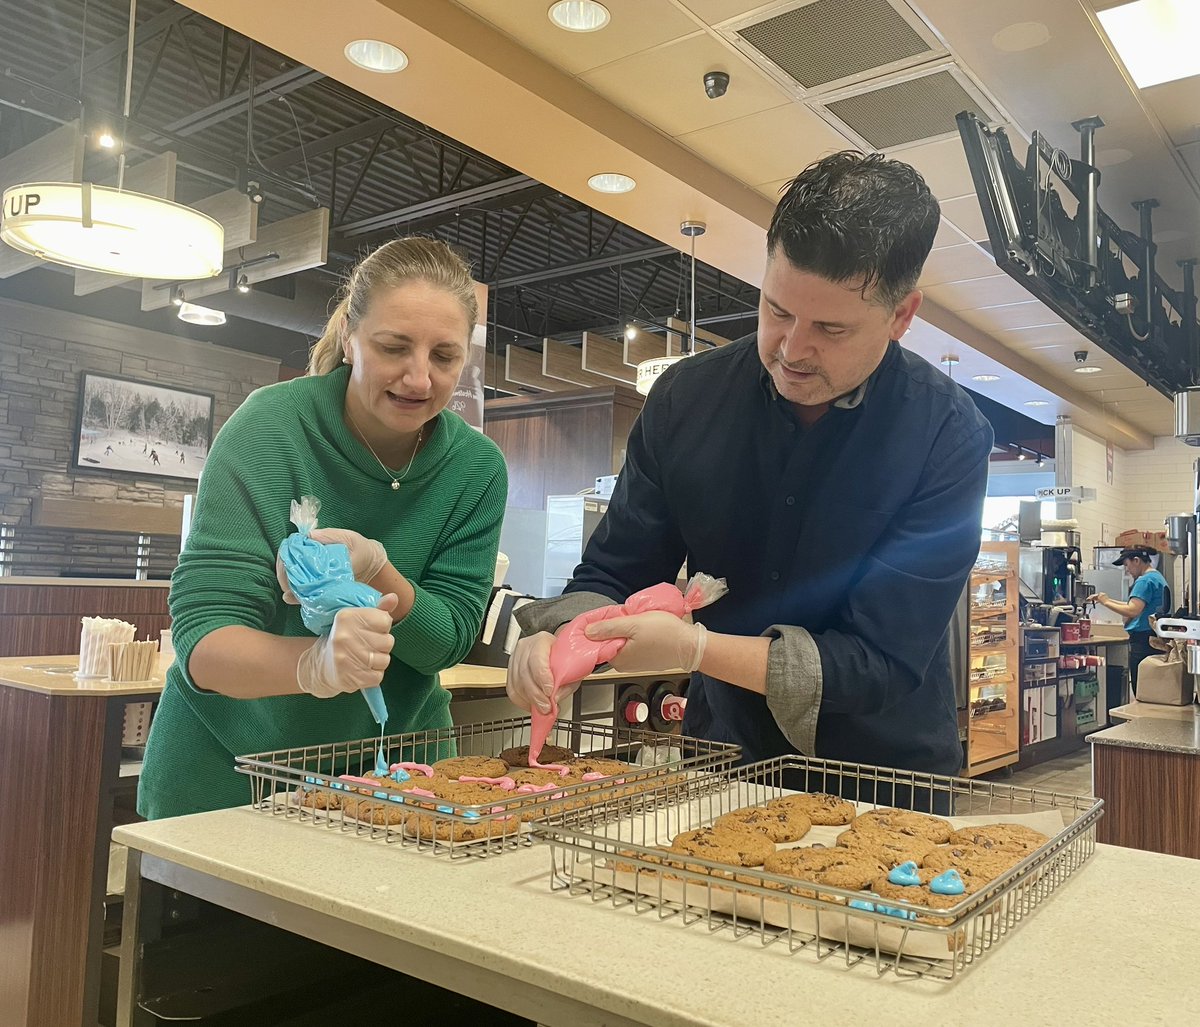 Tomorrow, May 5, is the last day to get your #SmileCookie from @TimHortons . Proceeds support @HFShare & @Food4KidsHamOnt !  It was fun to decorate smile cookies with Anna from Food Share in #StoneyCreek this morning.